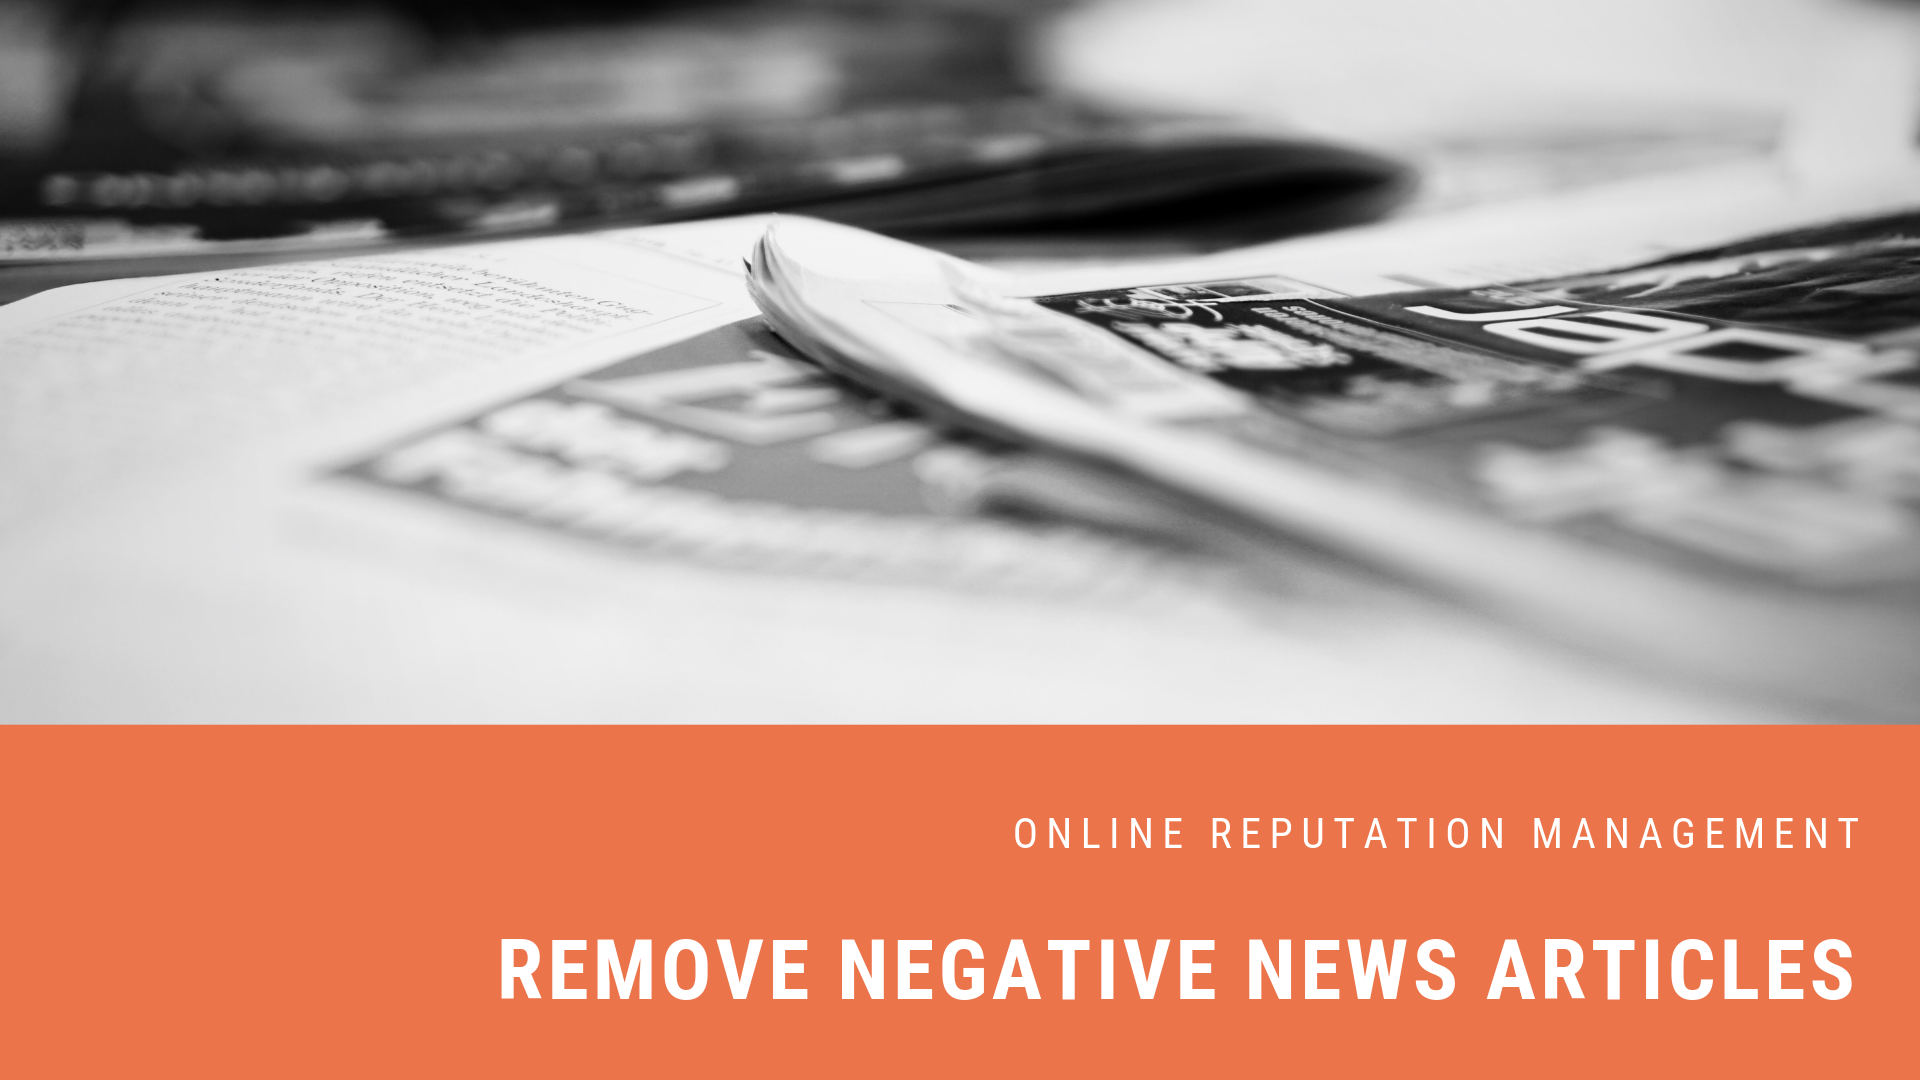 How To Handle a Negative Newspaper Article On Google Search Results